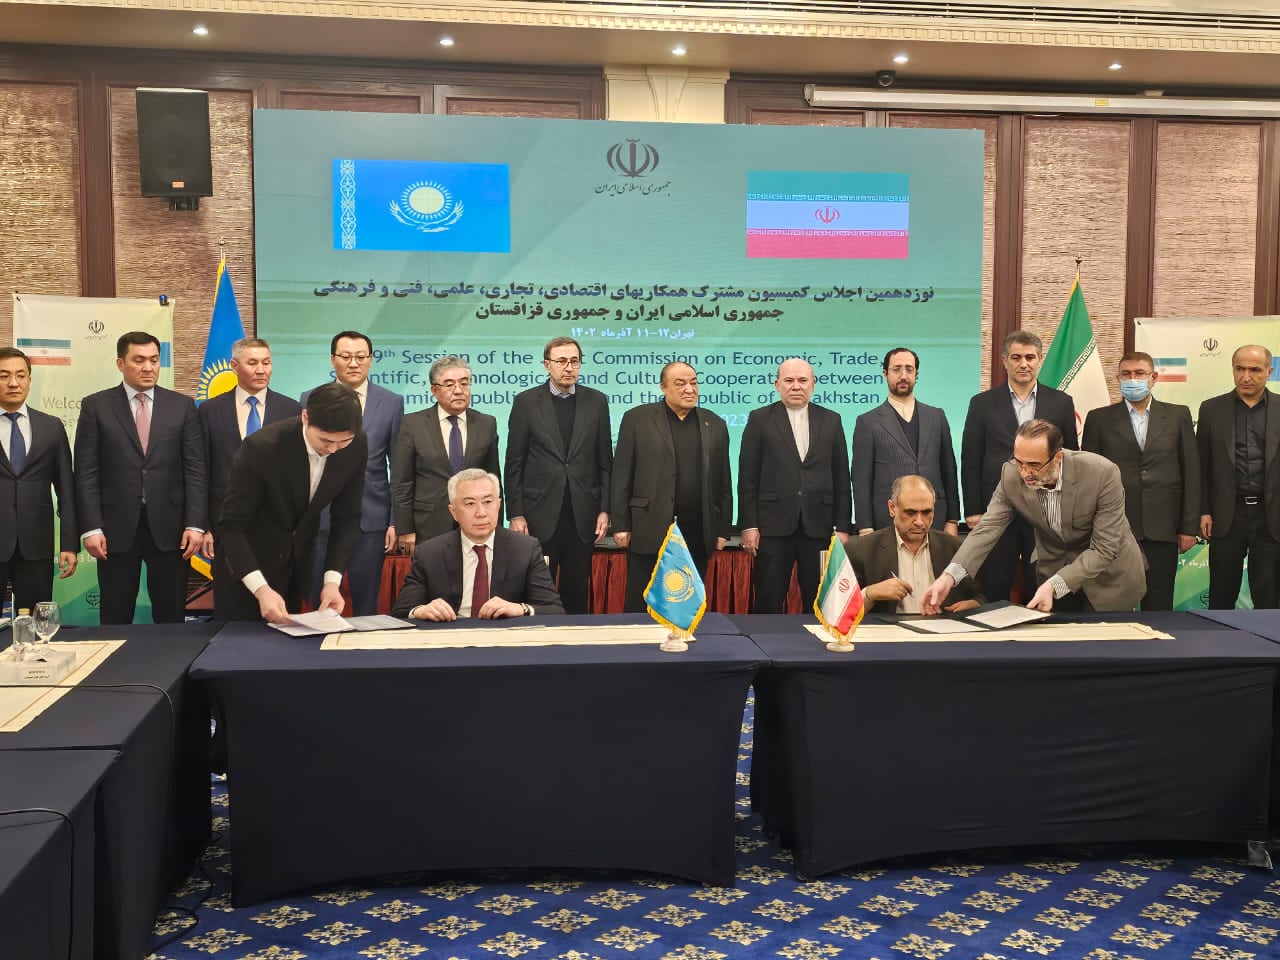 The 19th meeting of the Joint Intergovernmental Commission on trade, economic, scientific, technical and cultural cooperation between the Republic of Kazakhstan and the Islamic Republic of Iran